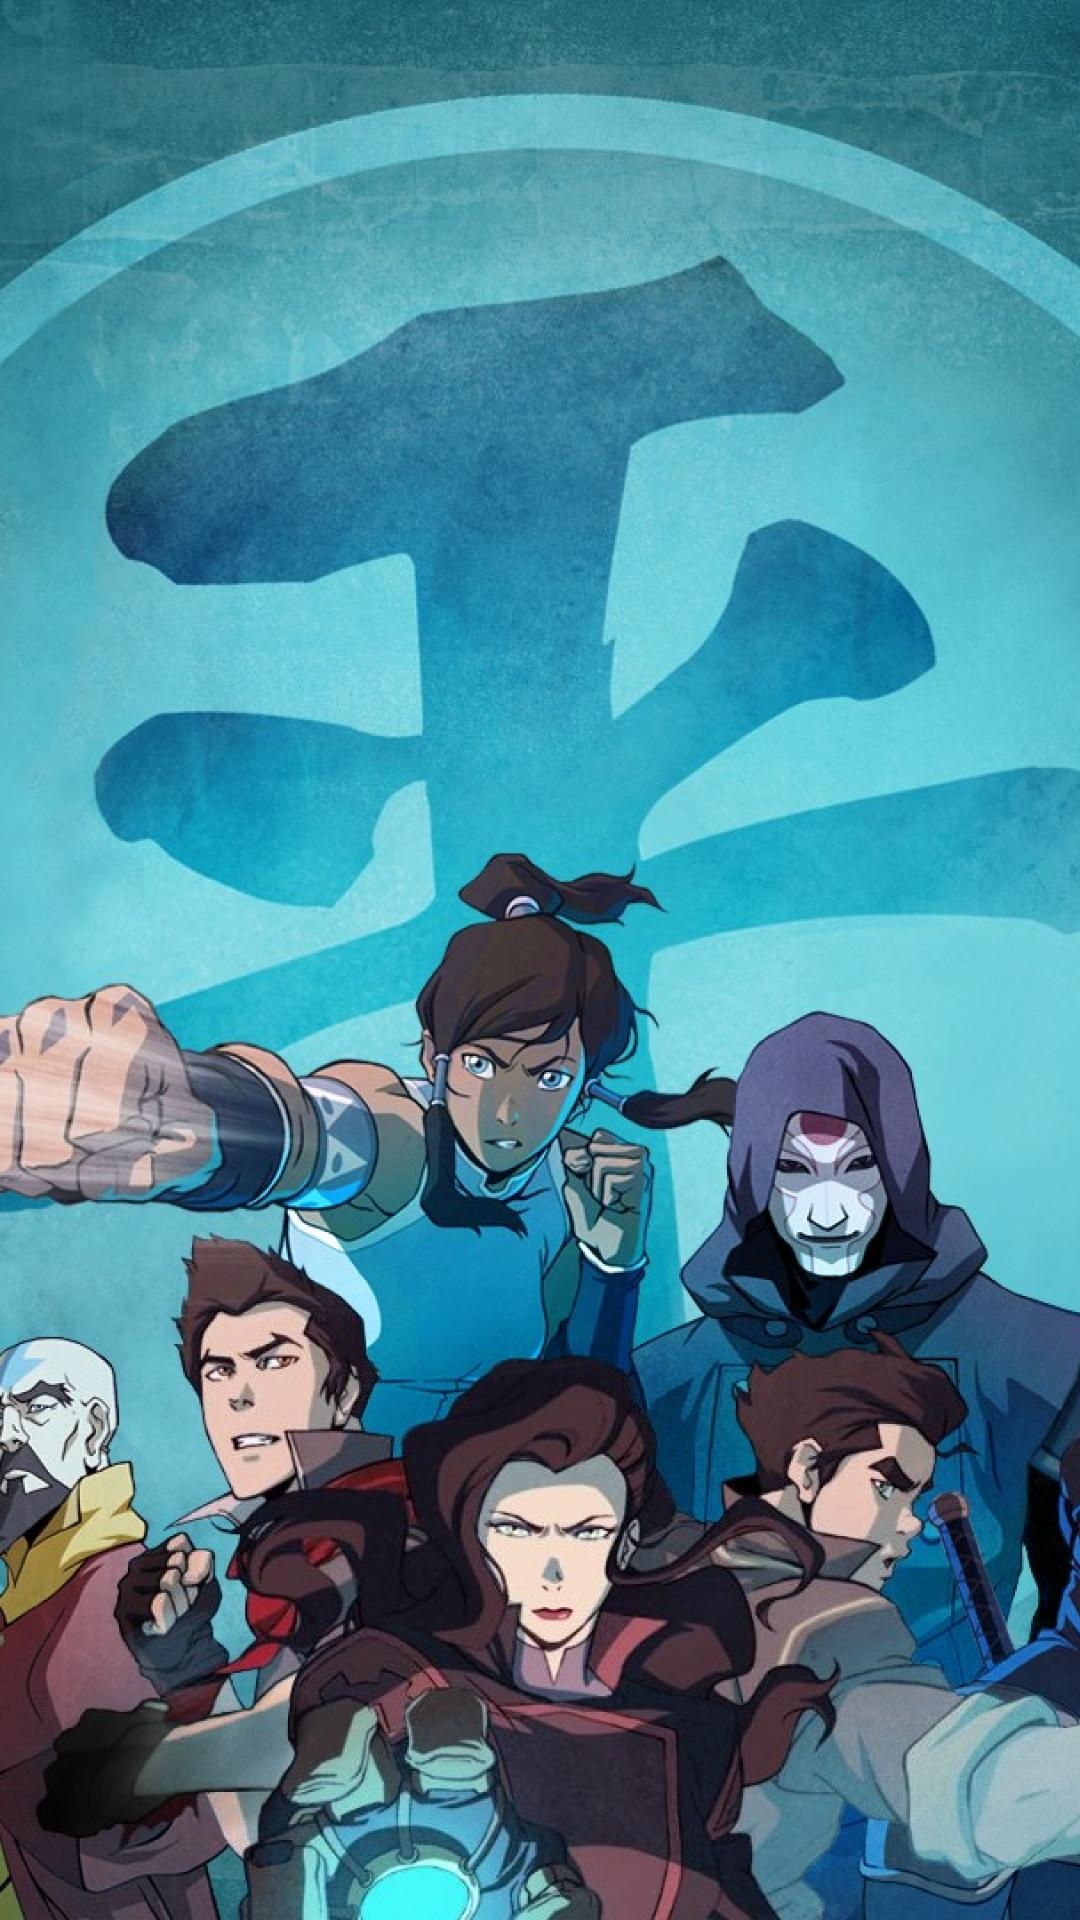 Legend of Korra wallpapers, iPhone compatible, Animated adventure, 1080x1920 Full HD Handy